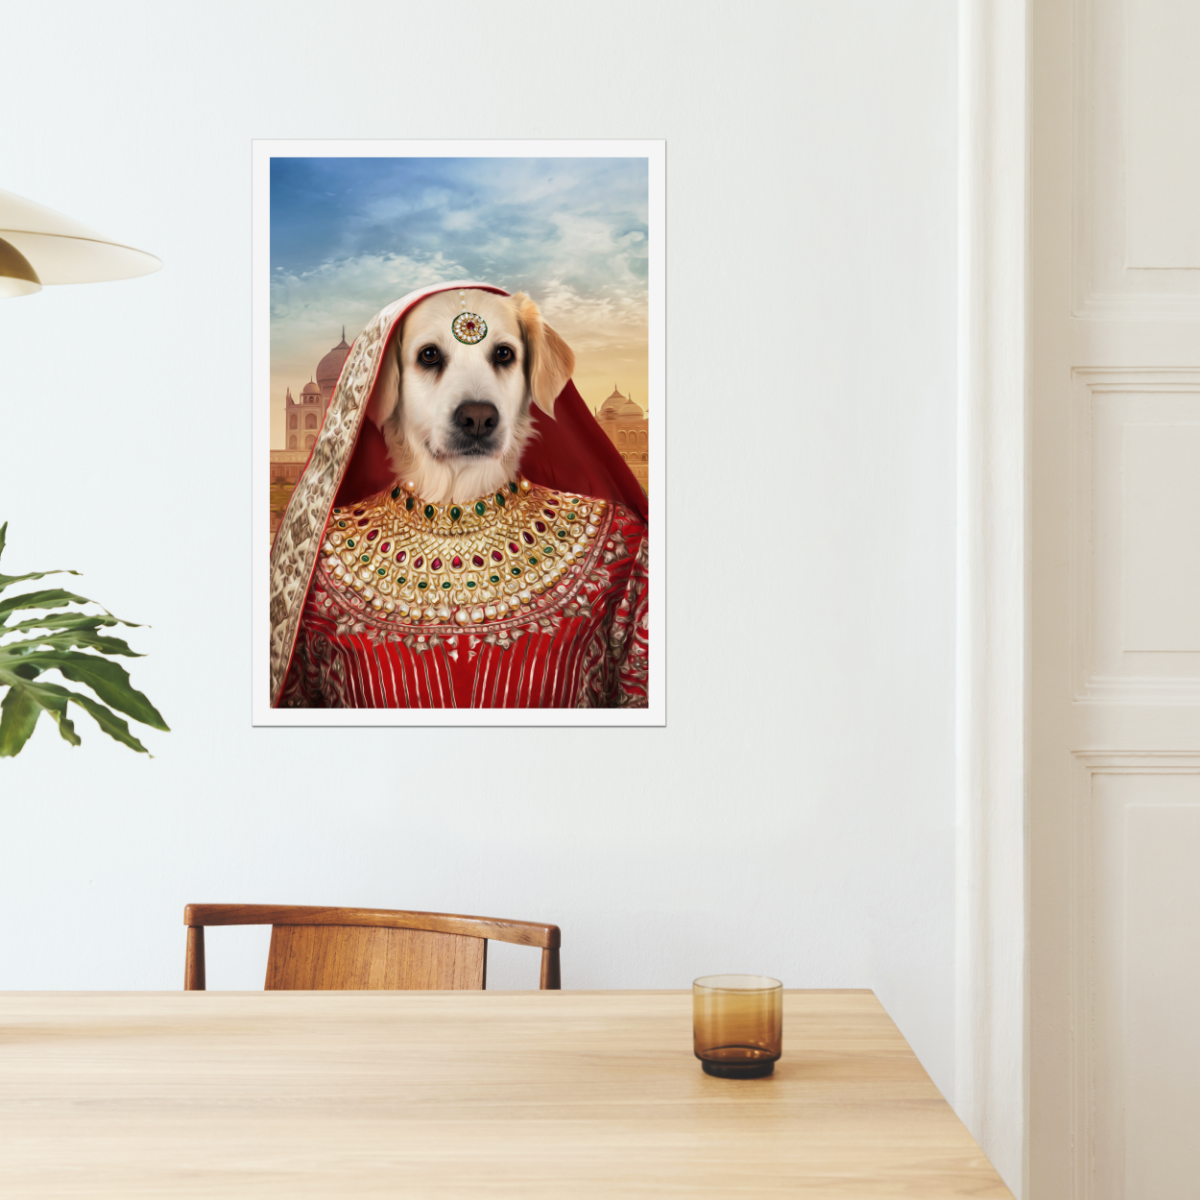 The Indian Rani: Custom Pet Poster - Paw & Glory - #pet portraits# - #dog portraits# - #pet portraits uk#Paw & Glory, paw and glory, personalized dog products, personalised pet drawings 3 dogs painting fun pet portraits paint my dog on canvas professional pet portraits pet portraits